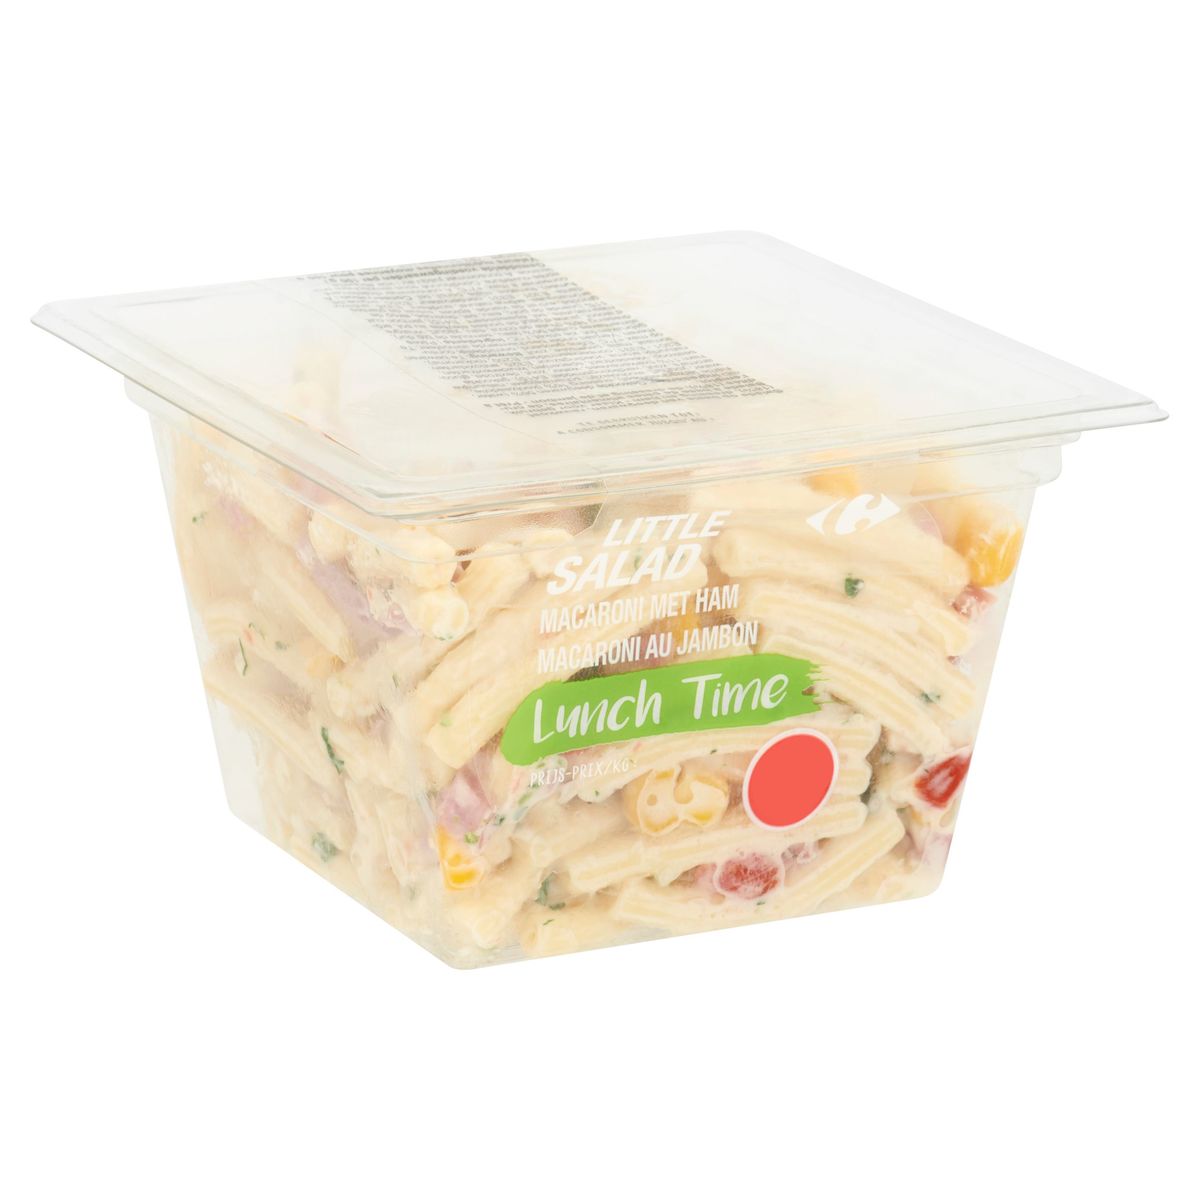 Carrefour Lunch Time Little Salad Macaroni met Ham 250 g